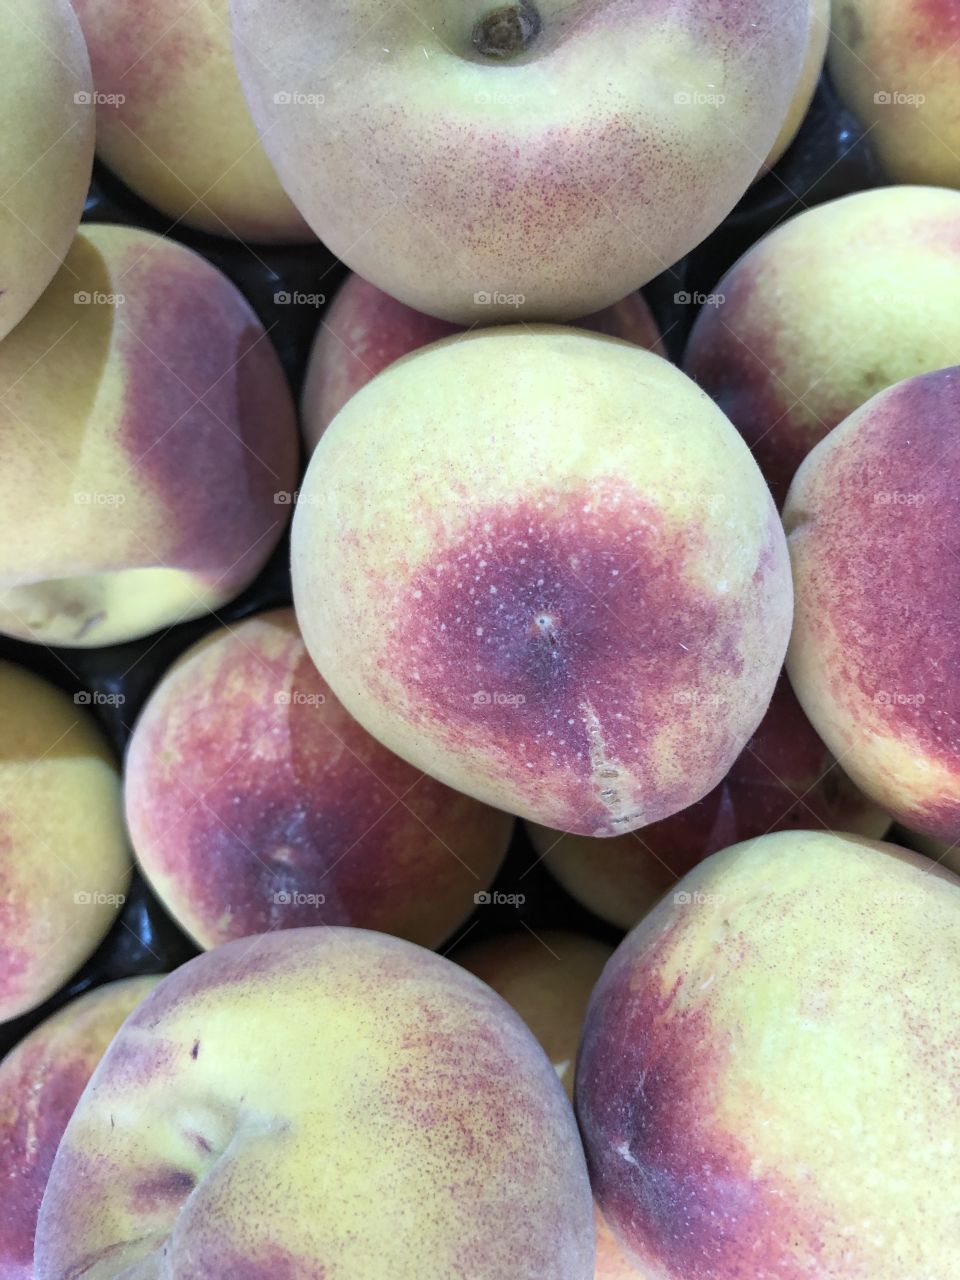 Premium peaches for sale yesterday indicating that Summer 2019 is just around the corner.